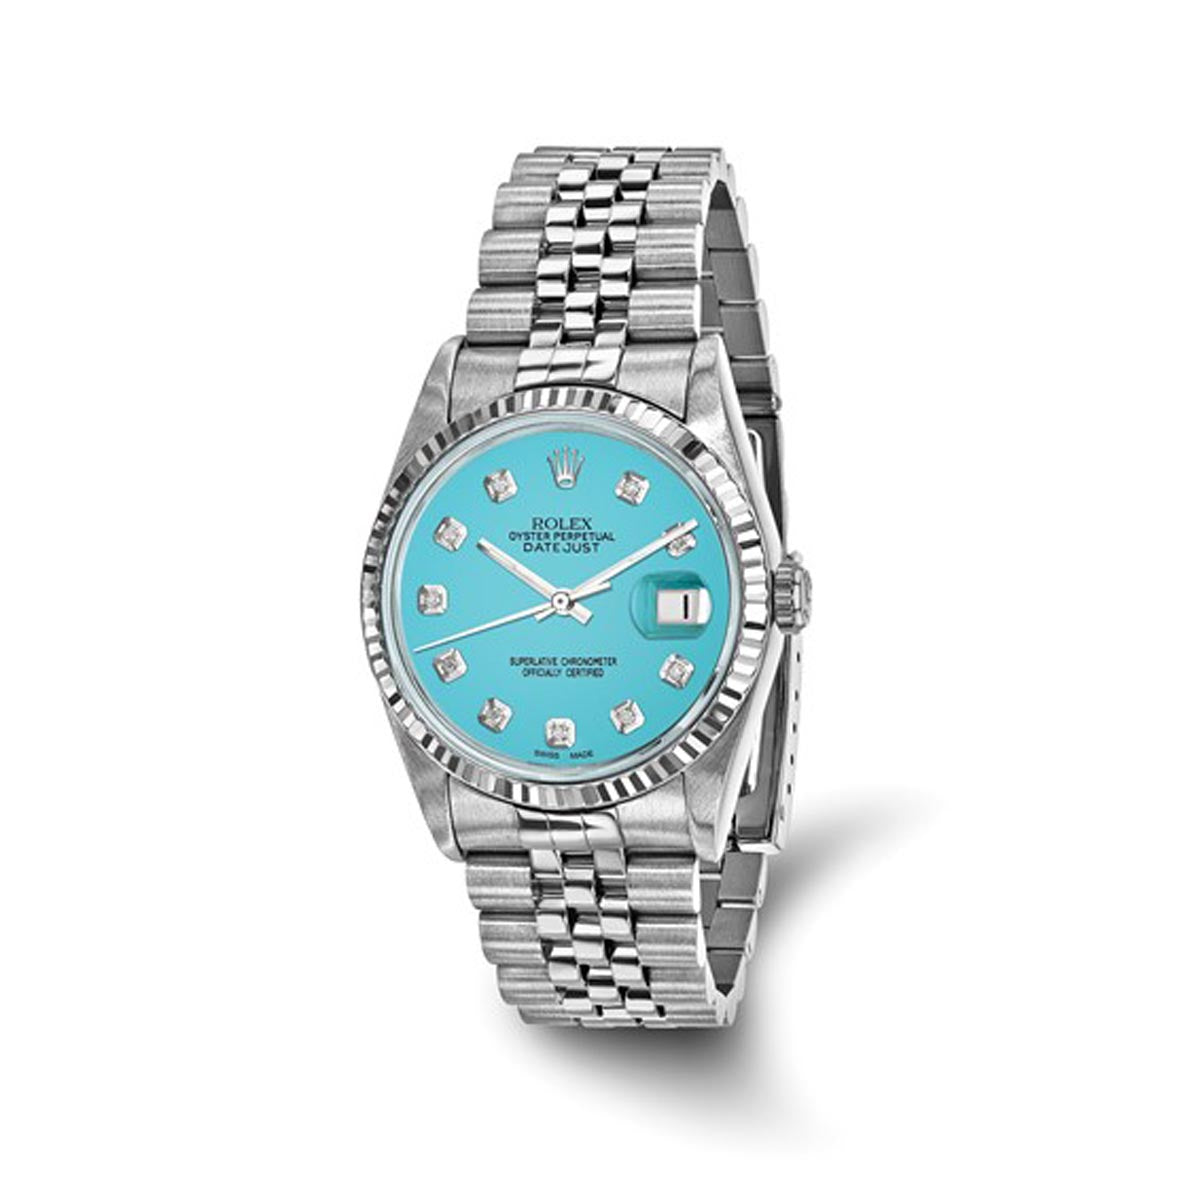 Pre Owned Rolex Oyster Perpetual Datejust with Teal Diamond Dial and 18kt White Gold Fluted Bezel and Stainless Steel Jubilee Bracelet (automatic movement)